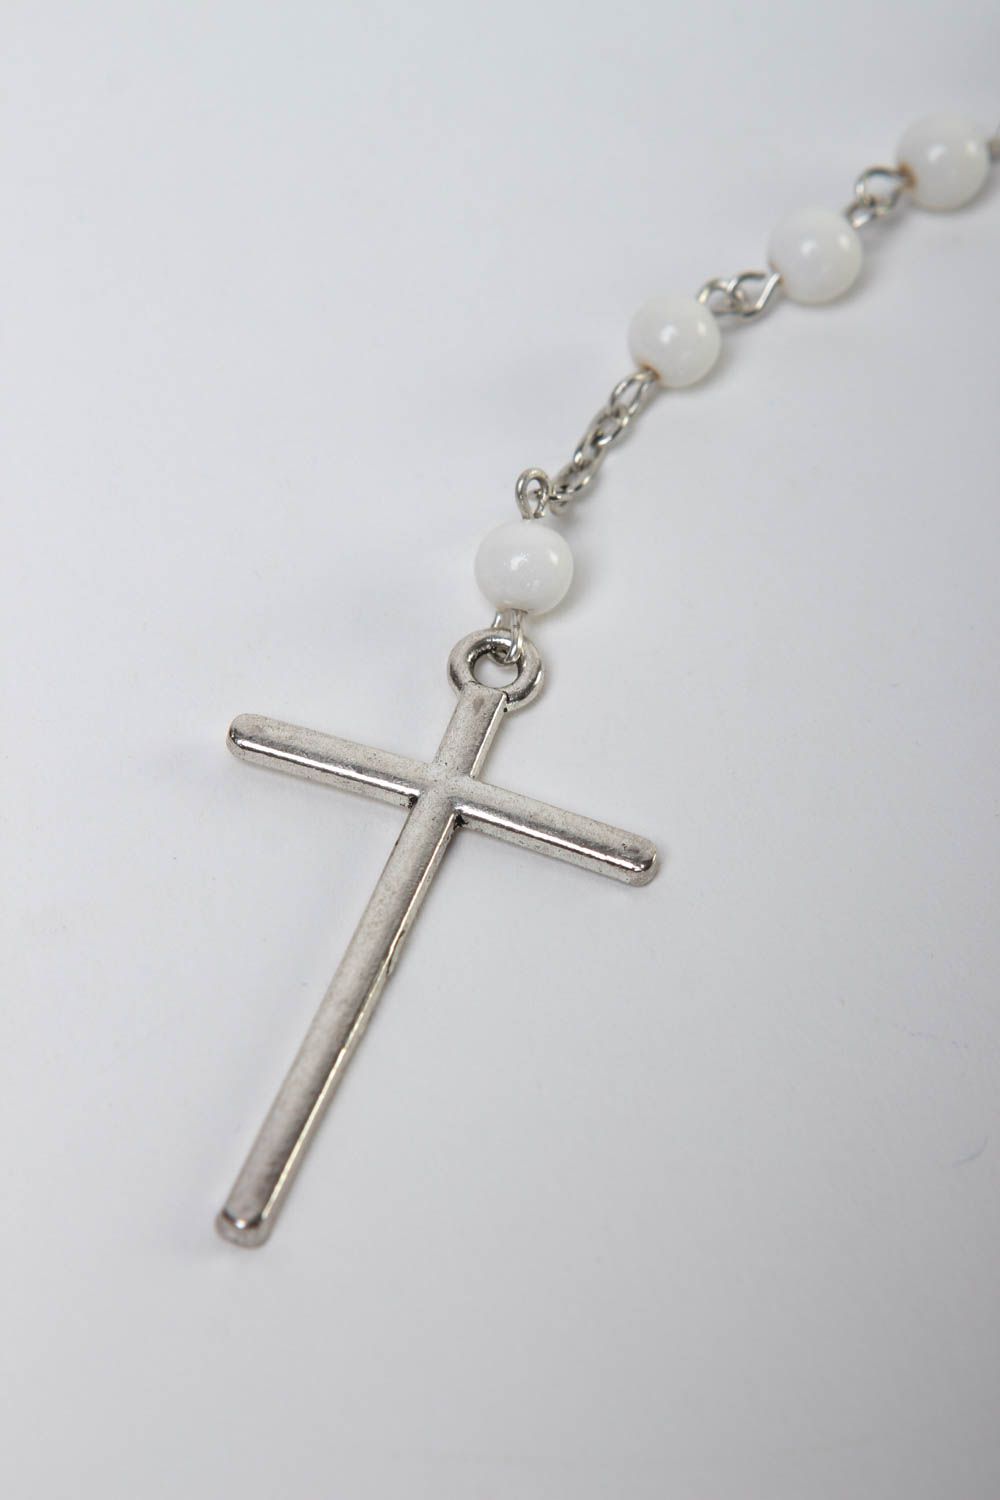 Handmade rosary designer accessory unusual necklace gift ideas rosary with cross photo 3